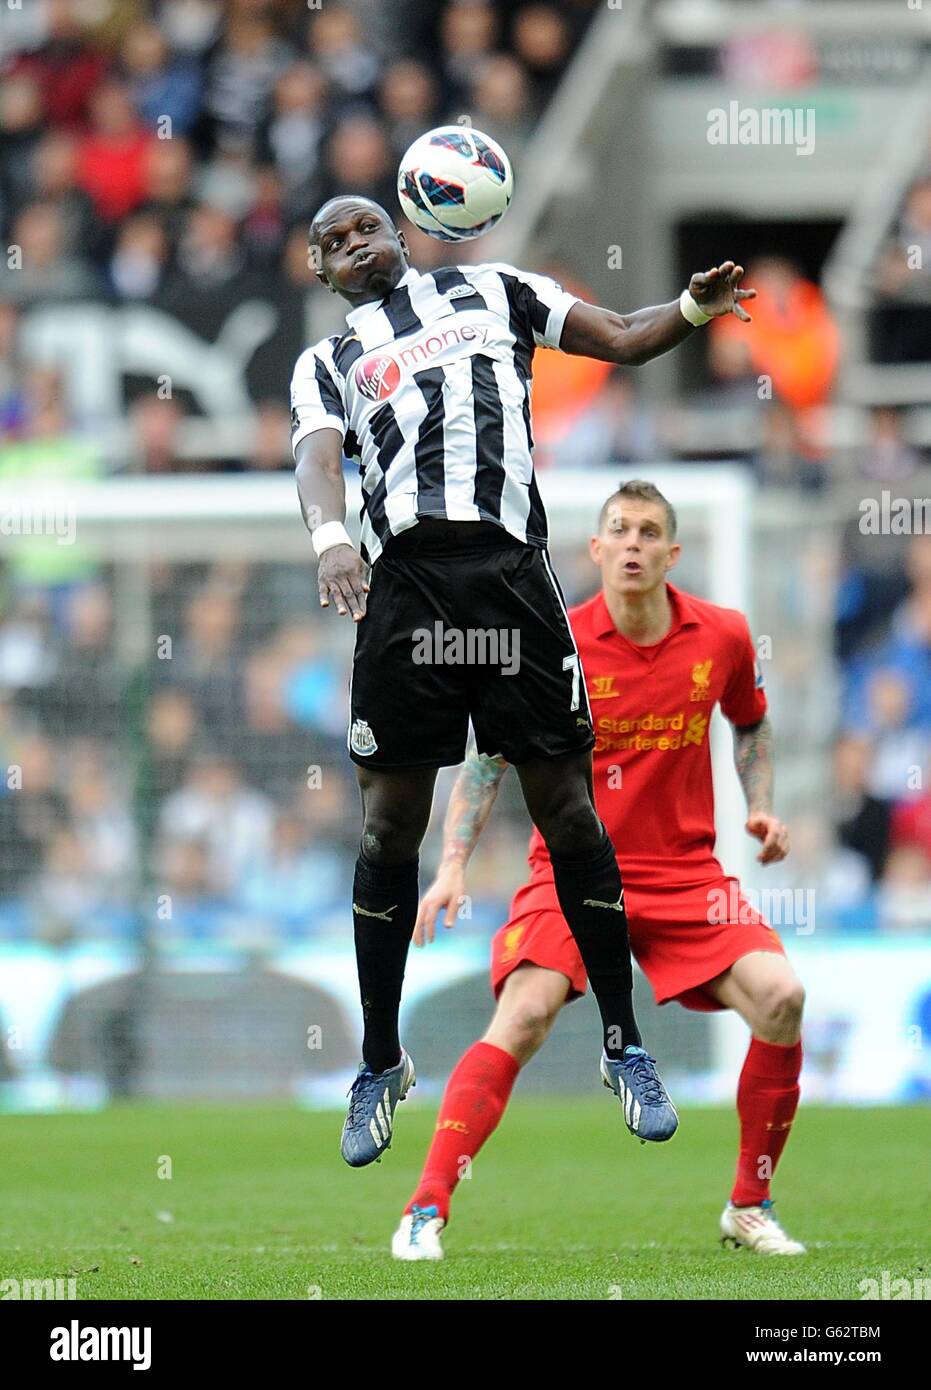 Soccer - Barclays Premier League - Newcastle United v Liverpool - St James' Park. Newcastle United's Moussa Sissoko chests the ball in mid air Stock Photo